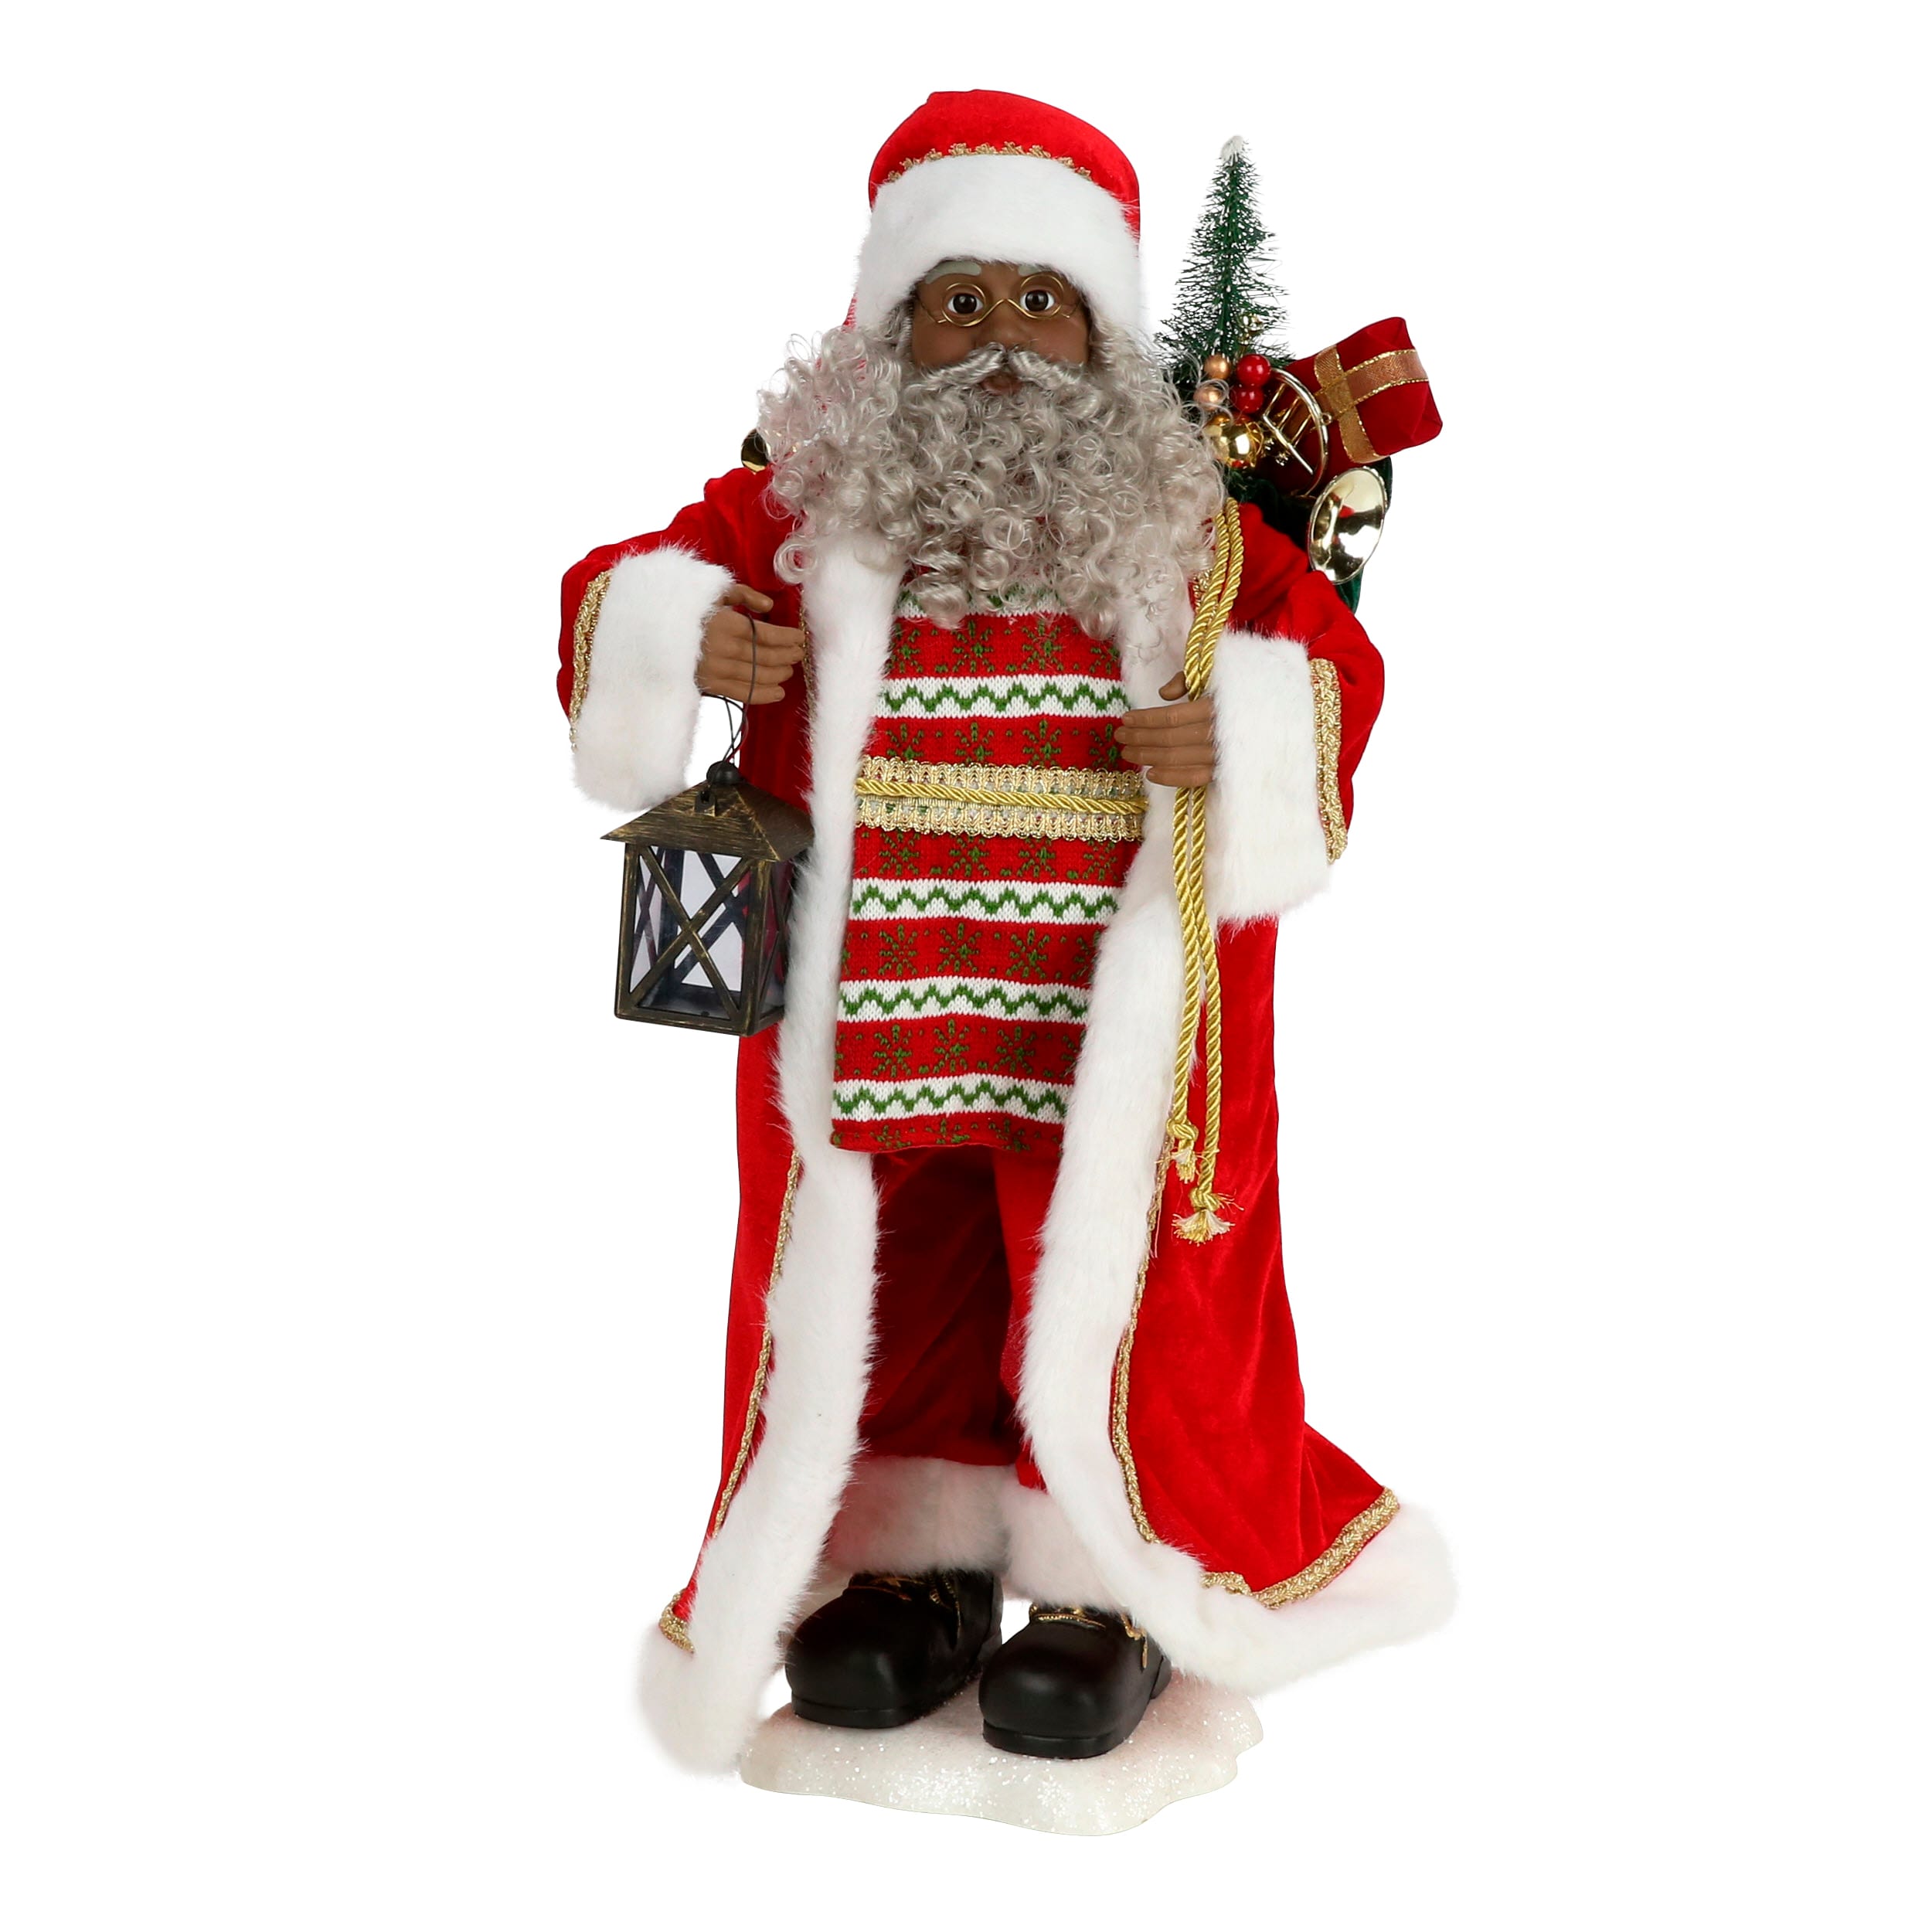 Christmas Time Light Up Santa Wooden Figure with 10 LED Lights Red White Green 